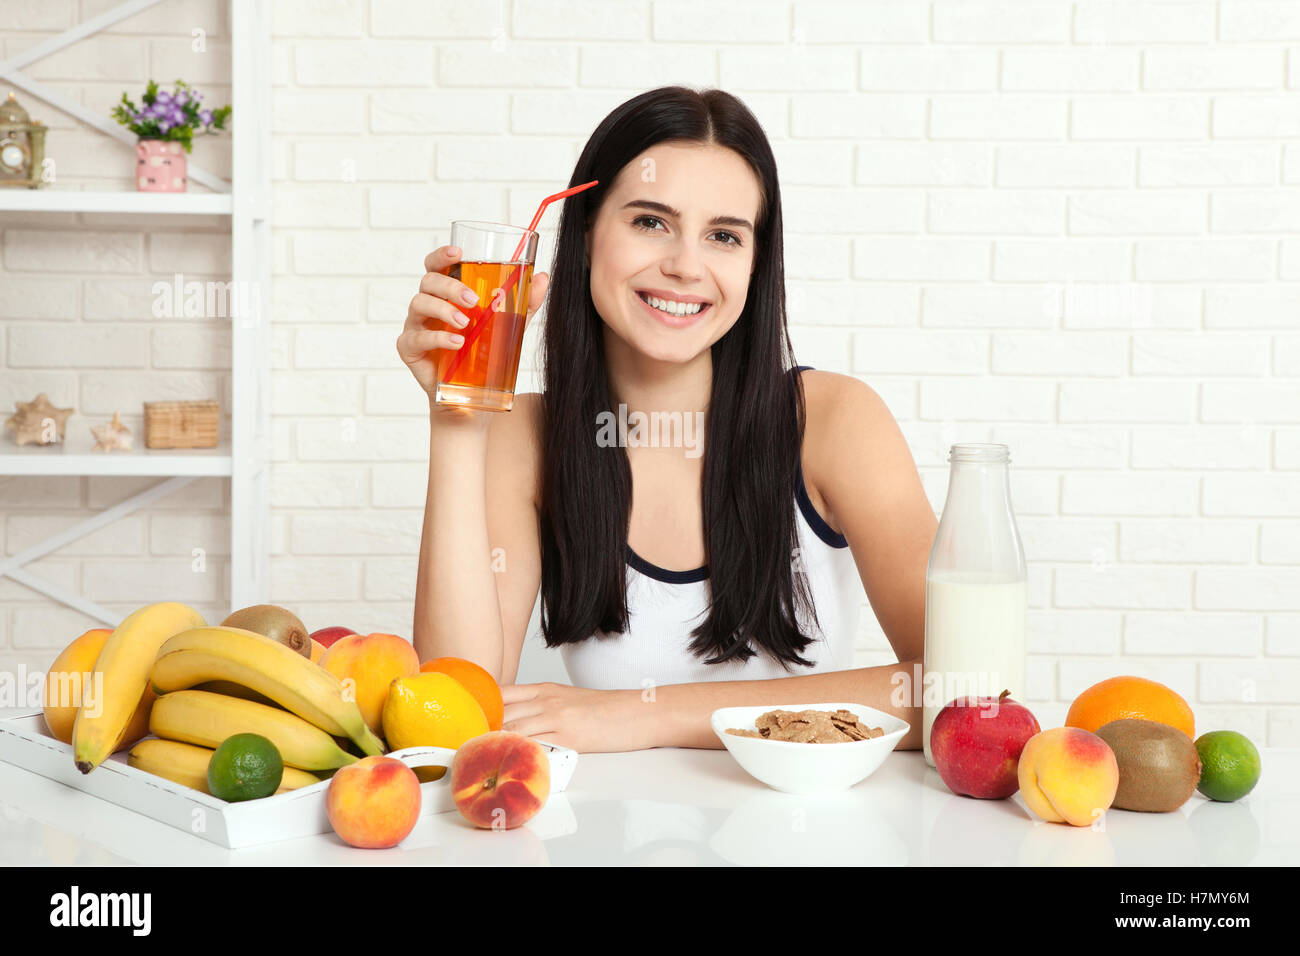 Beautiful women exists with pure skin on her face sitting at a table and eat breakfast. Asian woman eating healthy food at breakfast. Fruit, cereal and milk. Stock Photo